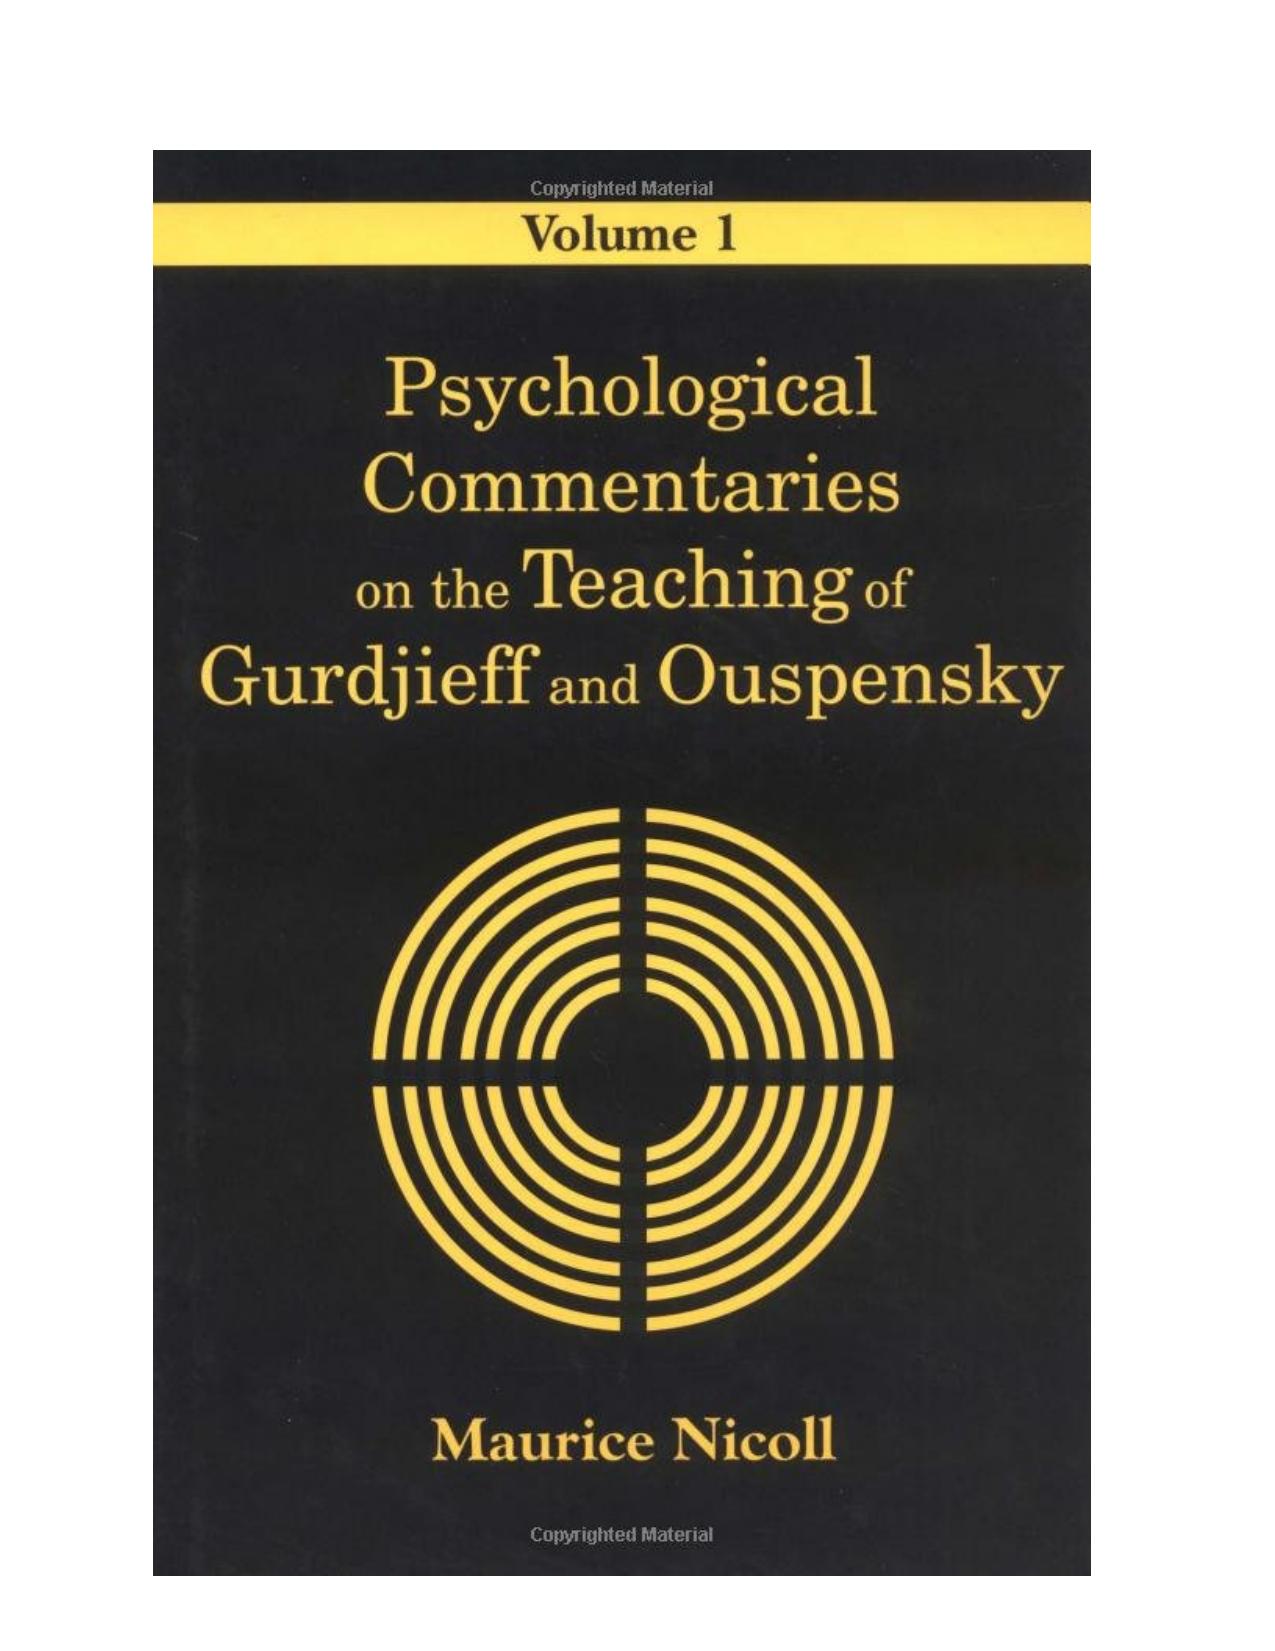 Psychological Commentaries on the Teaching of Gurdjieff and Ouspensky - Volume 1